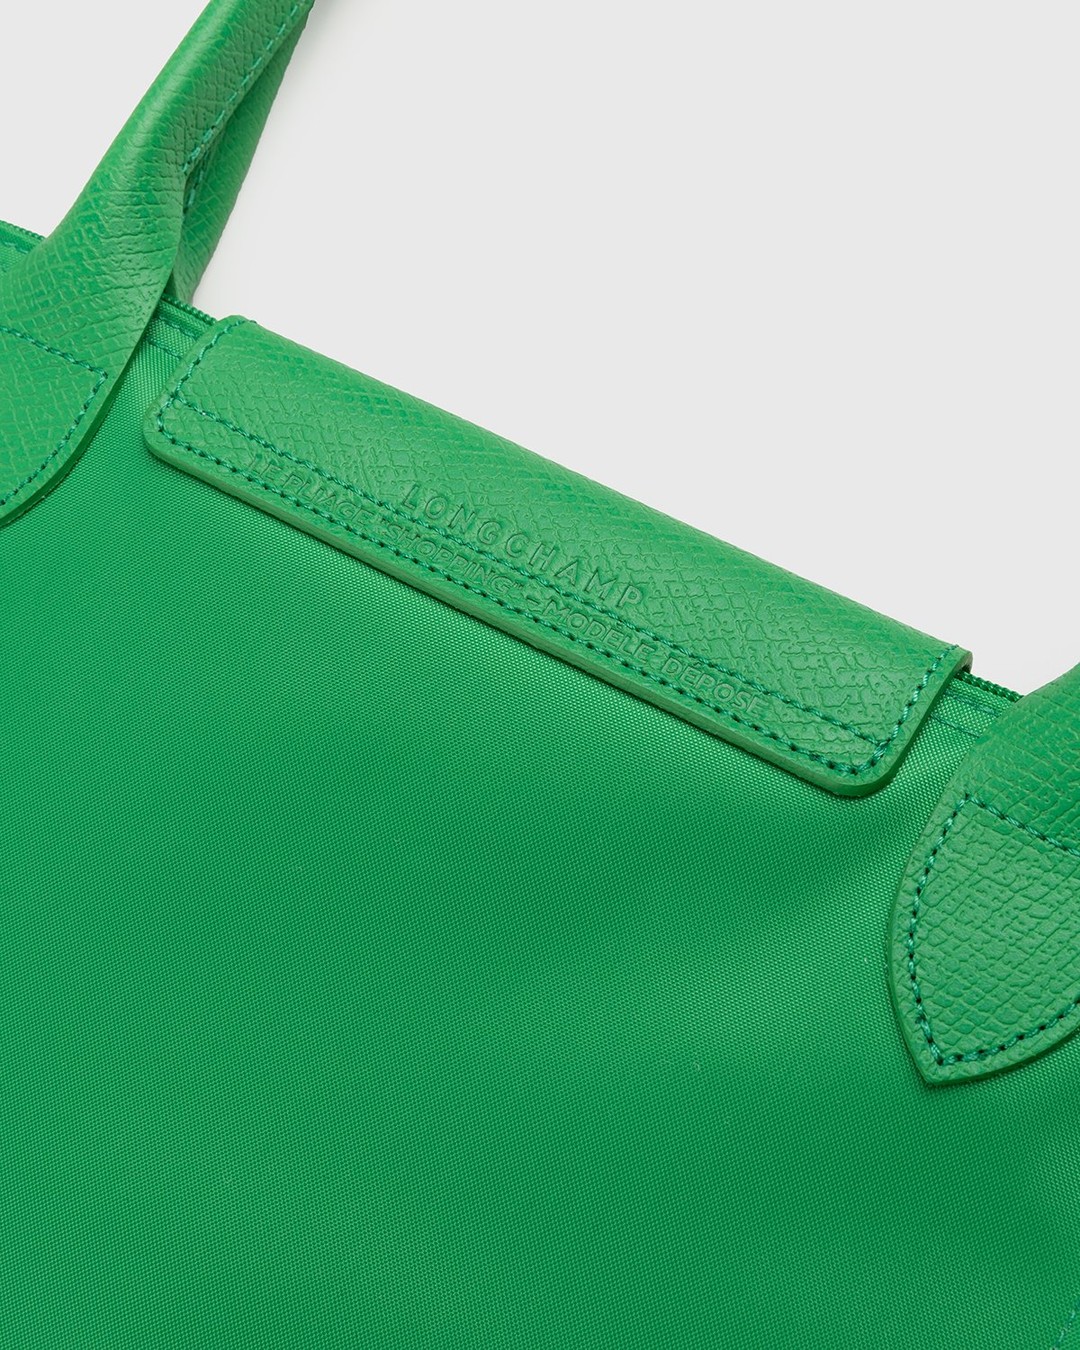 3 Bags to Shop From Longchamp's Le Pliage Green Collection